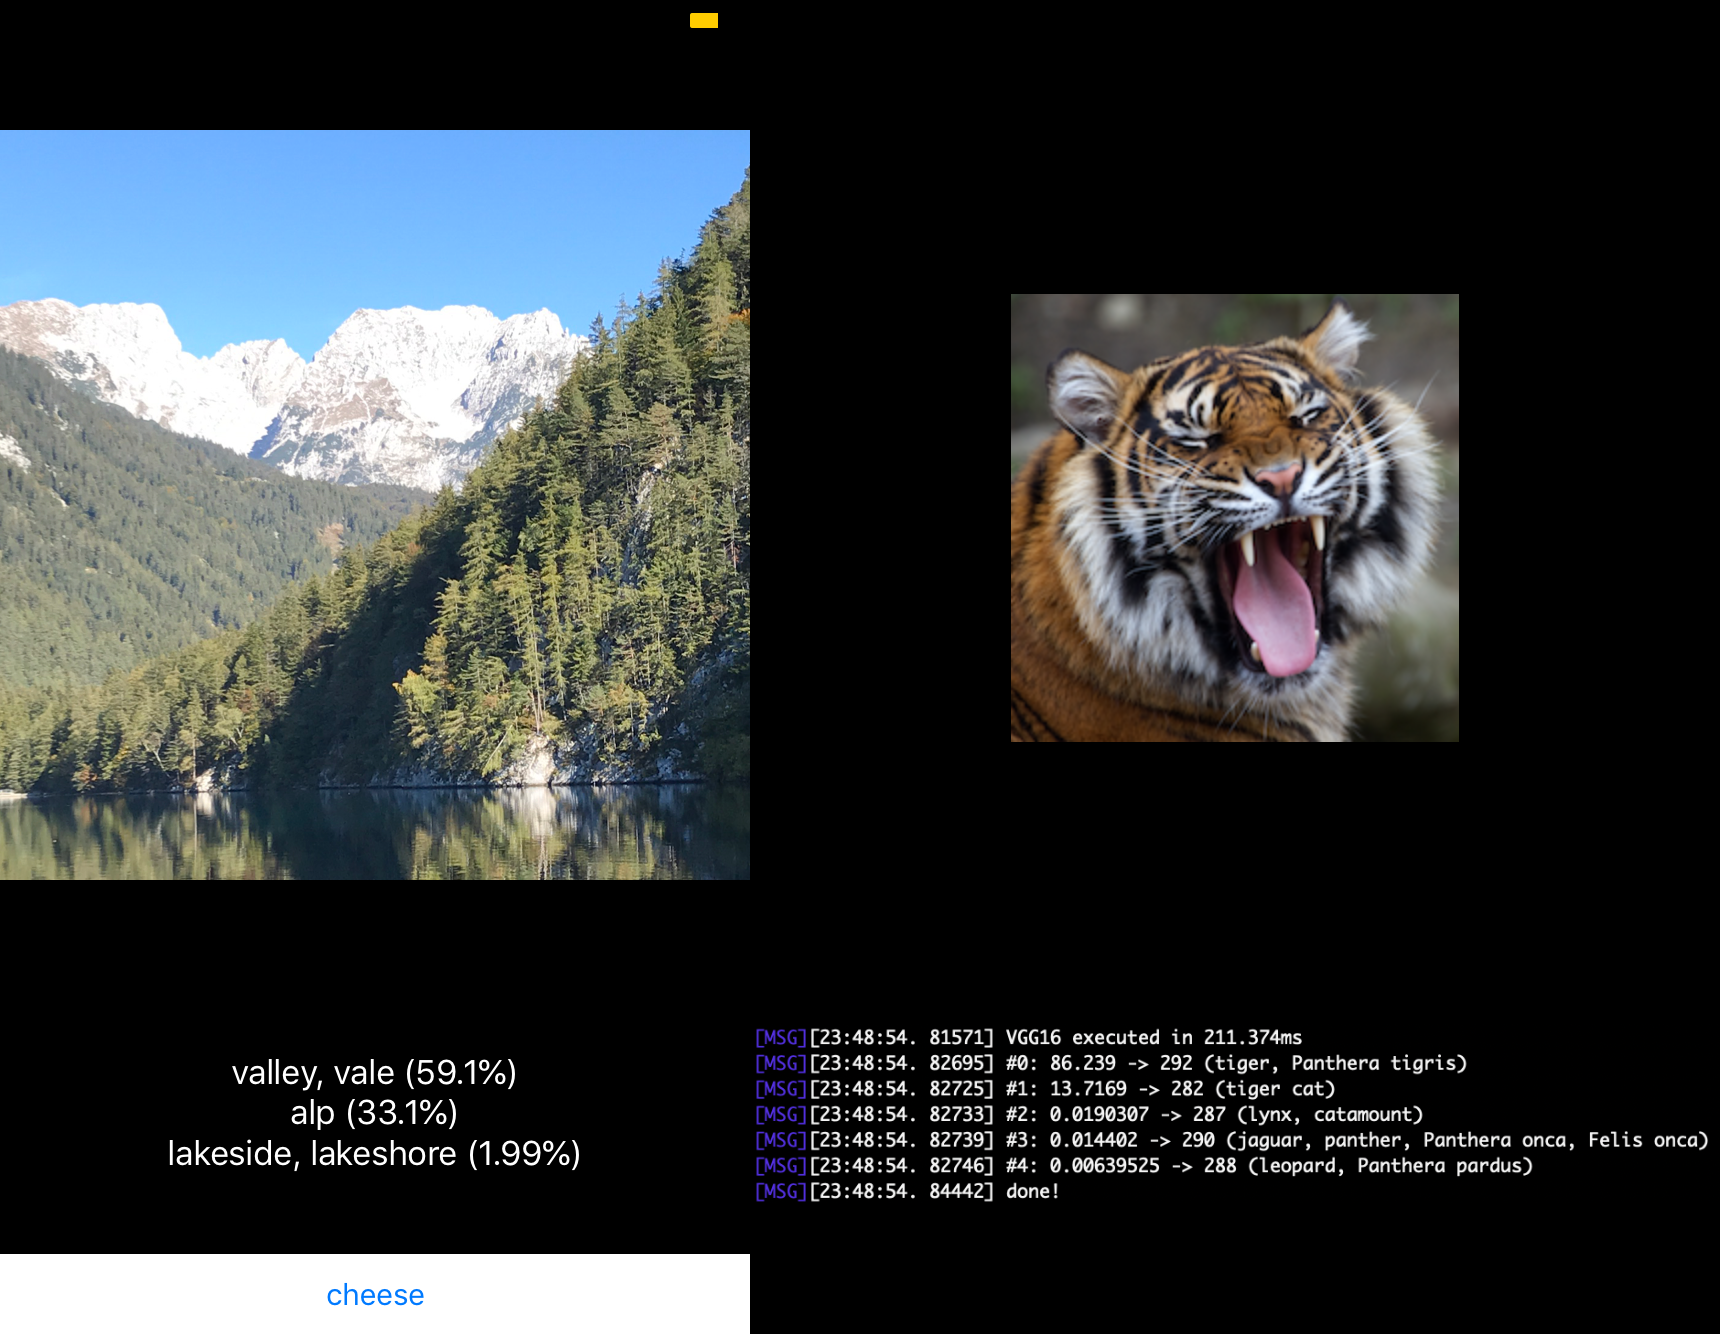 iOS: Lake in the Alps; cli: Tiger, licensed under CC BY 2.0 by Tony Hisgett